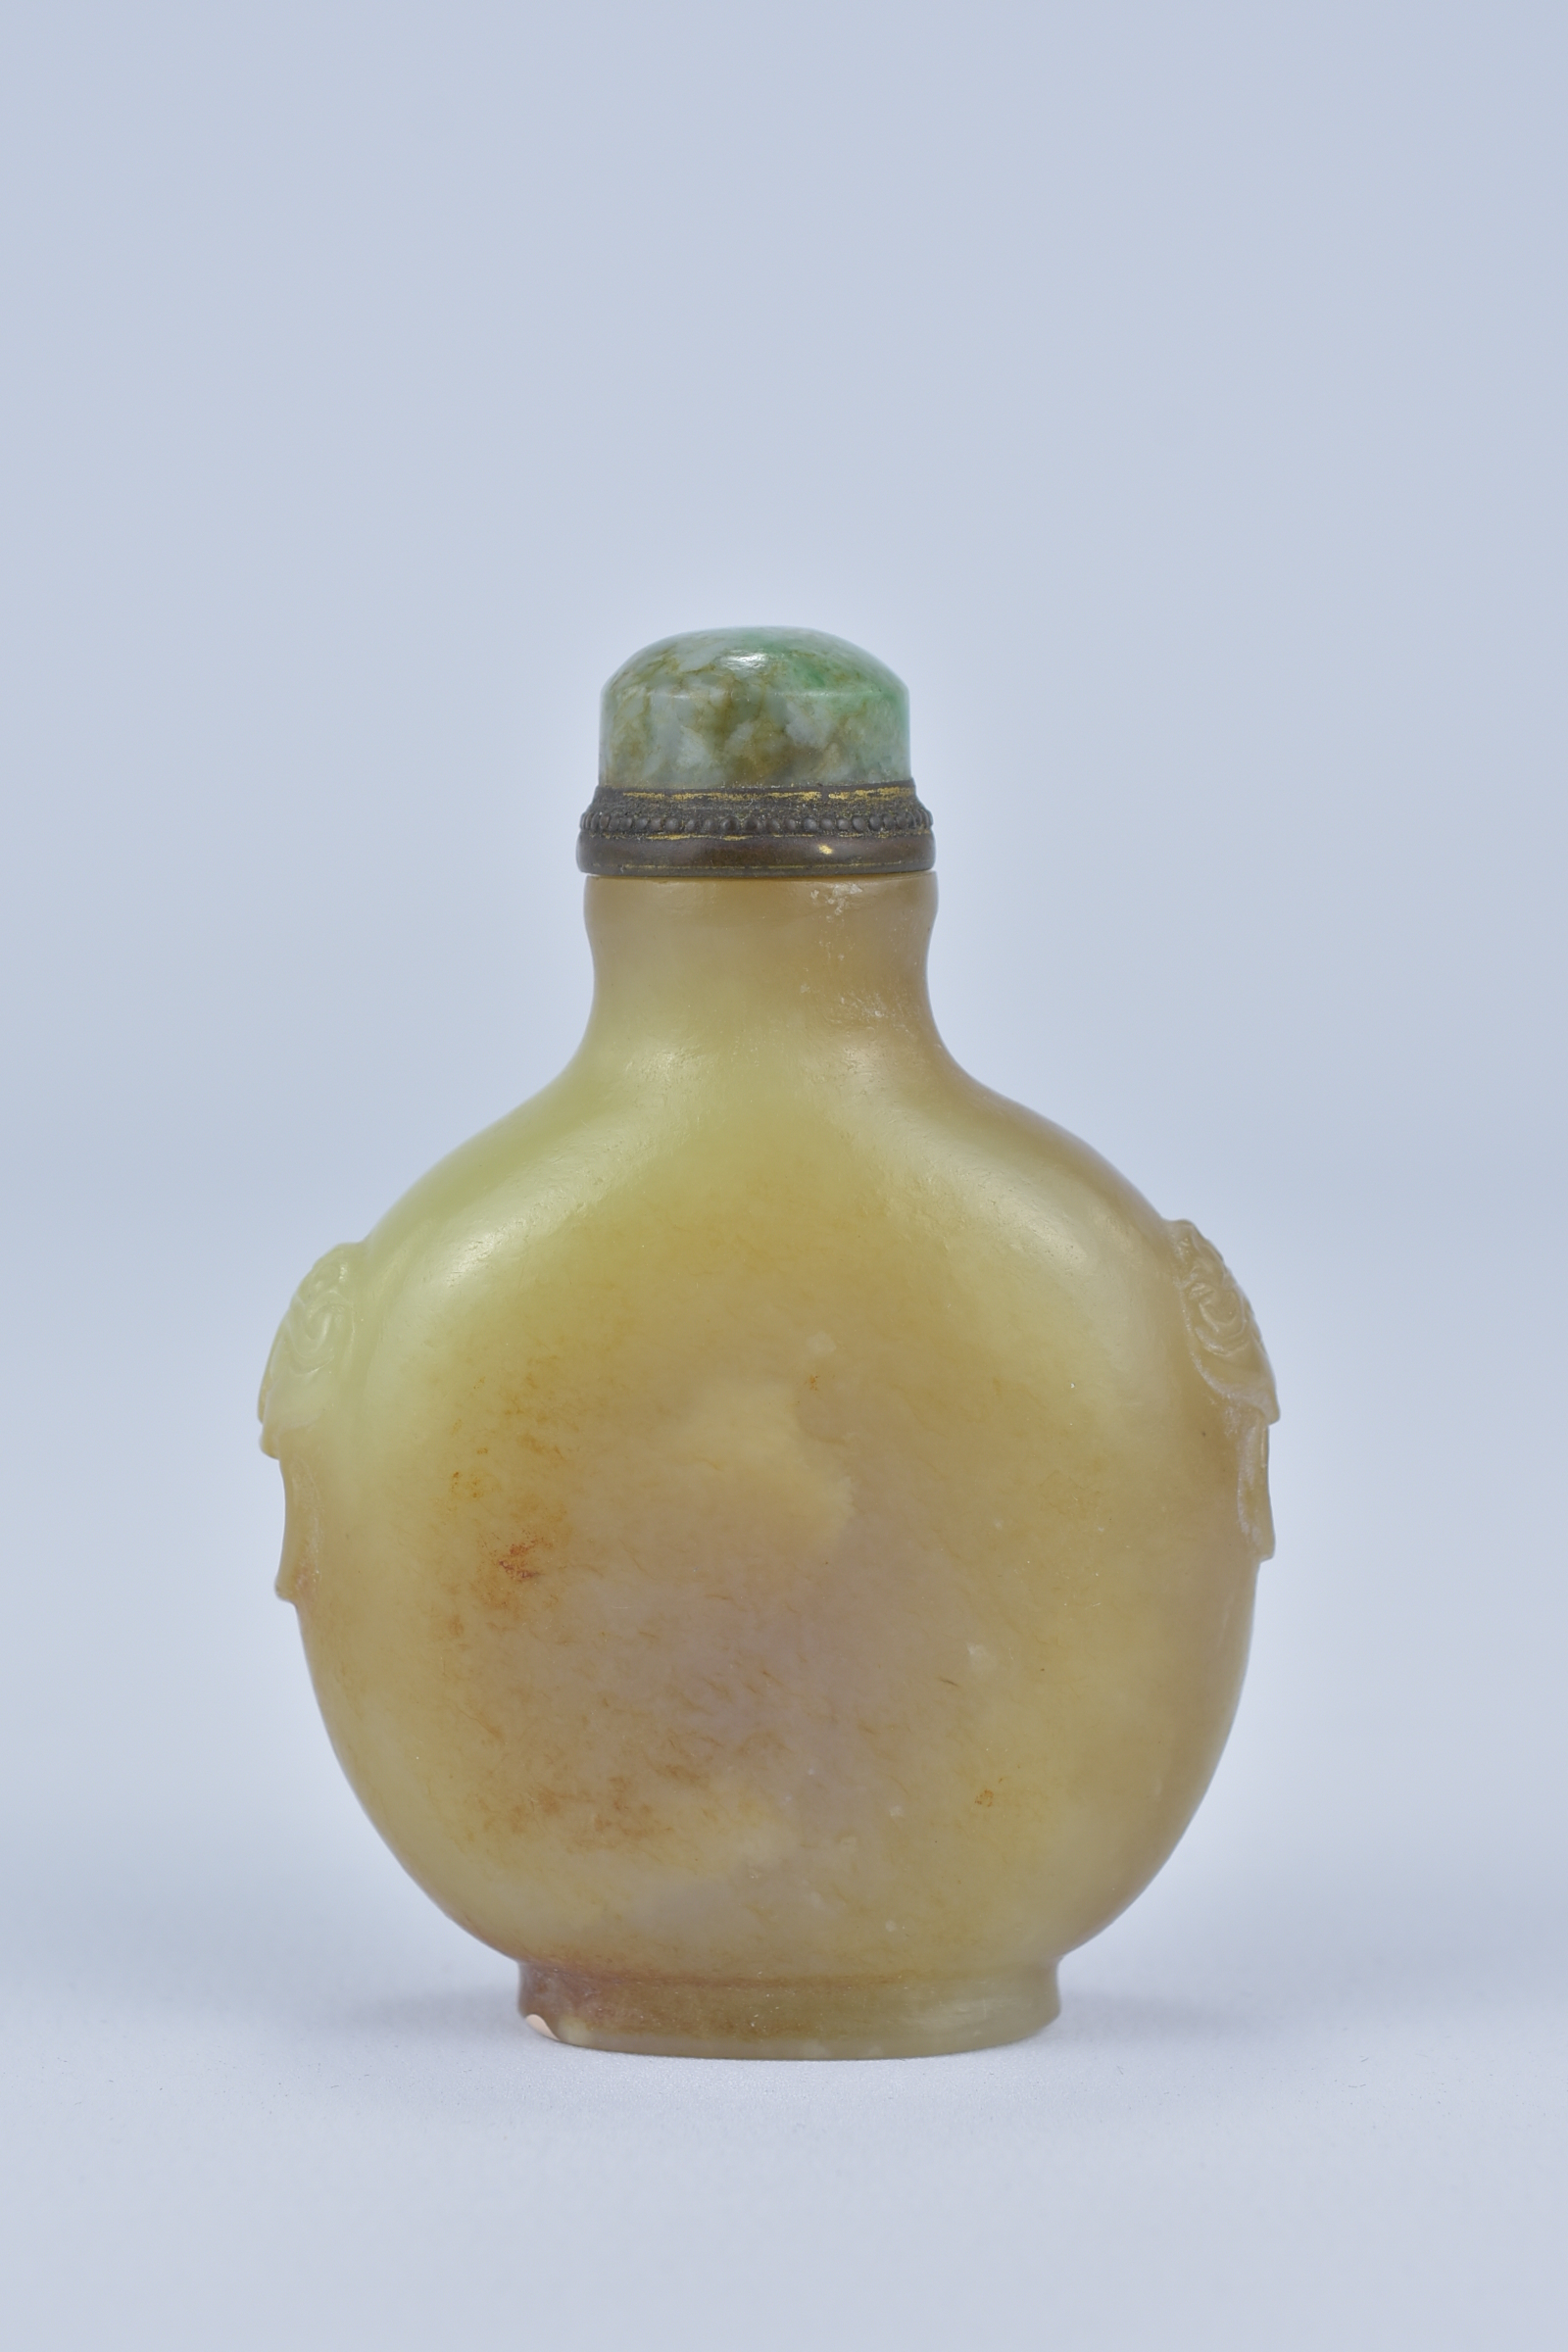 A Chinese 19th century yellow and brown Jade Snuff Bottle with jade stopper. 7cm tall. Purchased bet